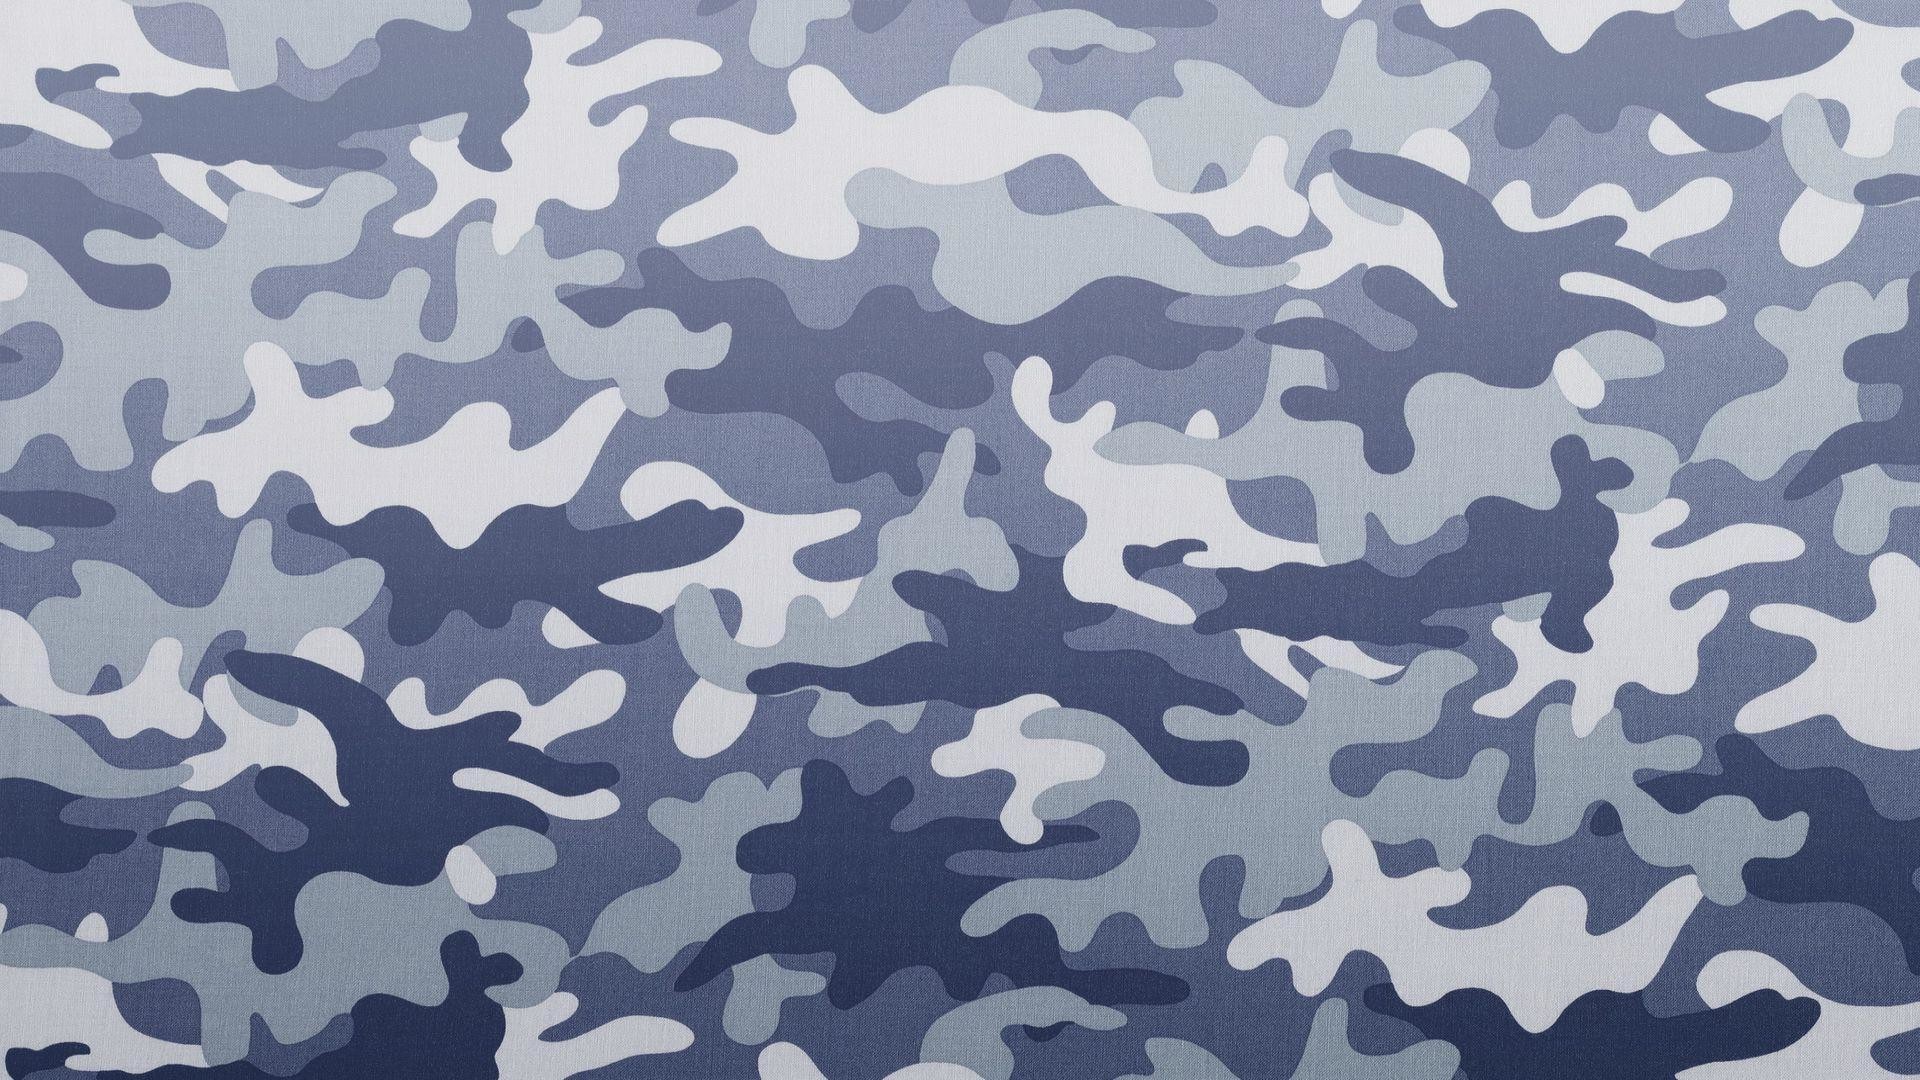 Army Camouflage Stock Images, Royalty Free Images Vectors